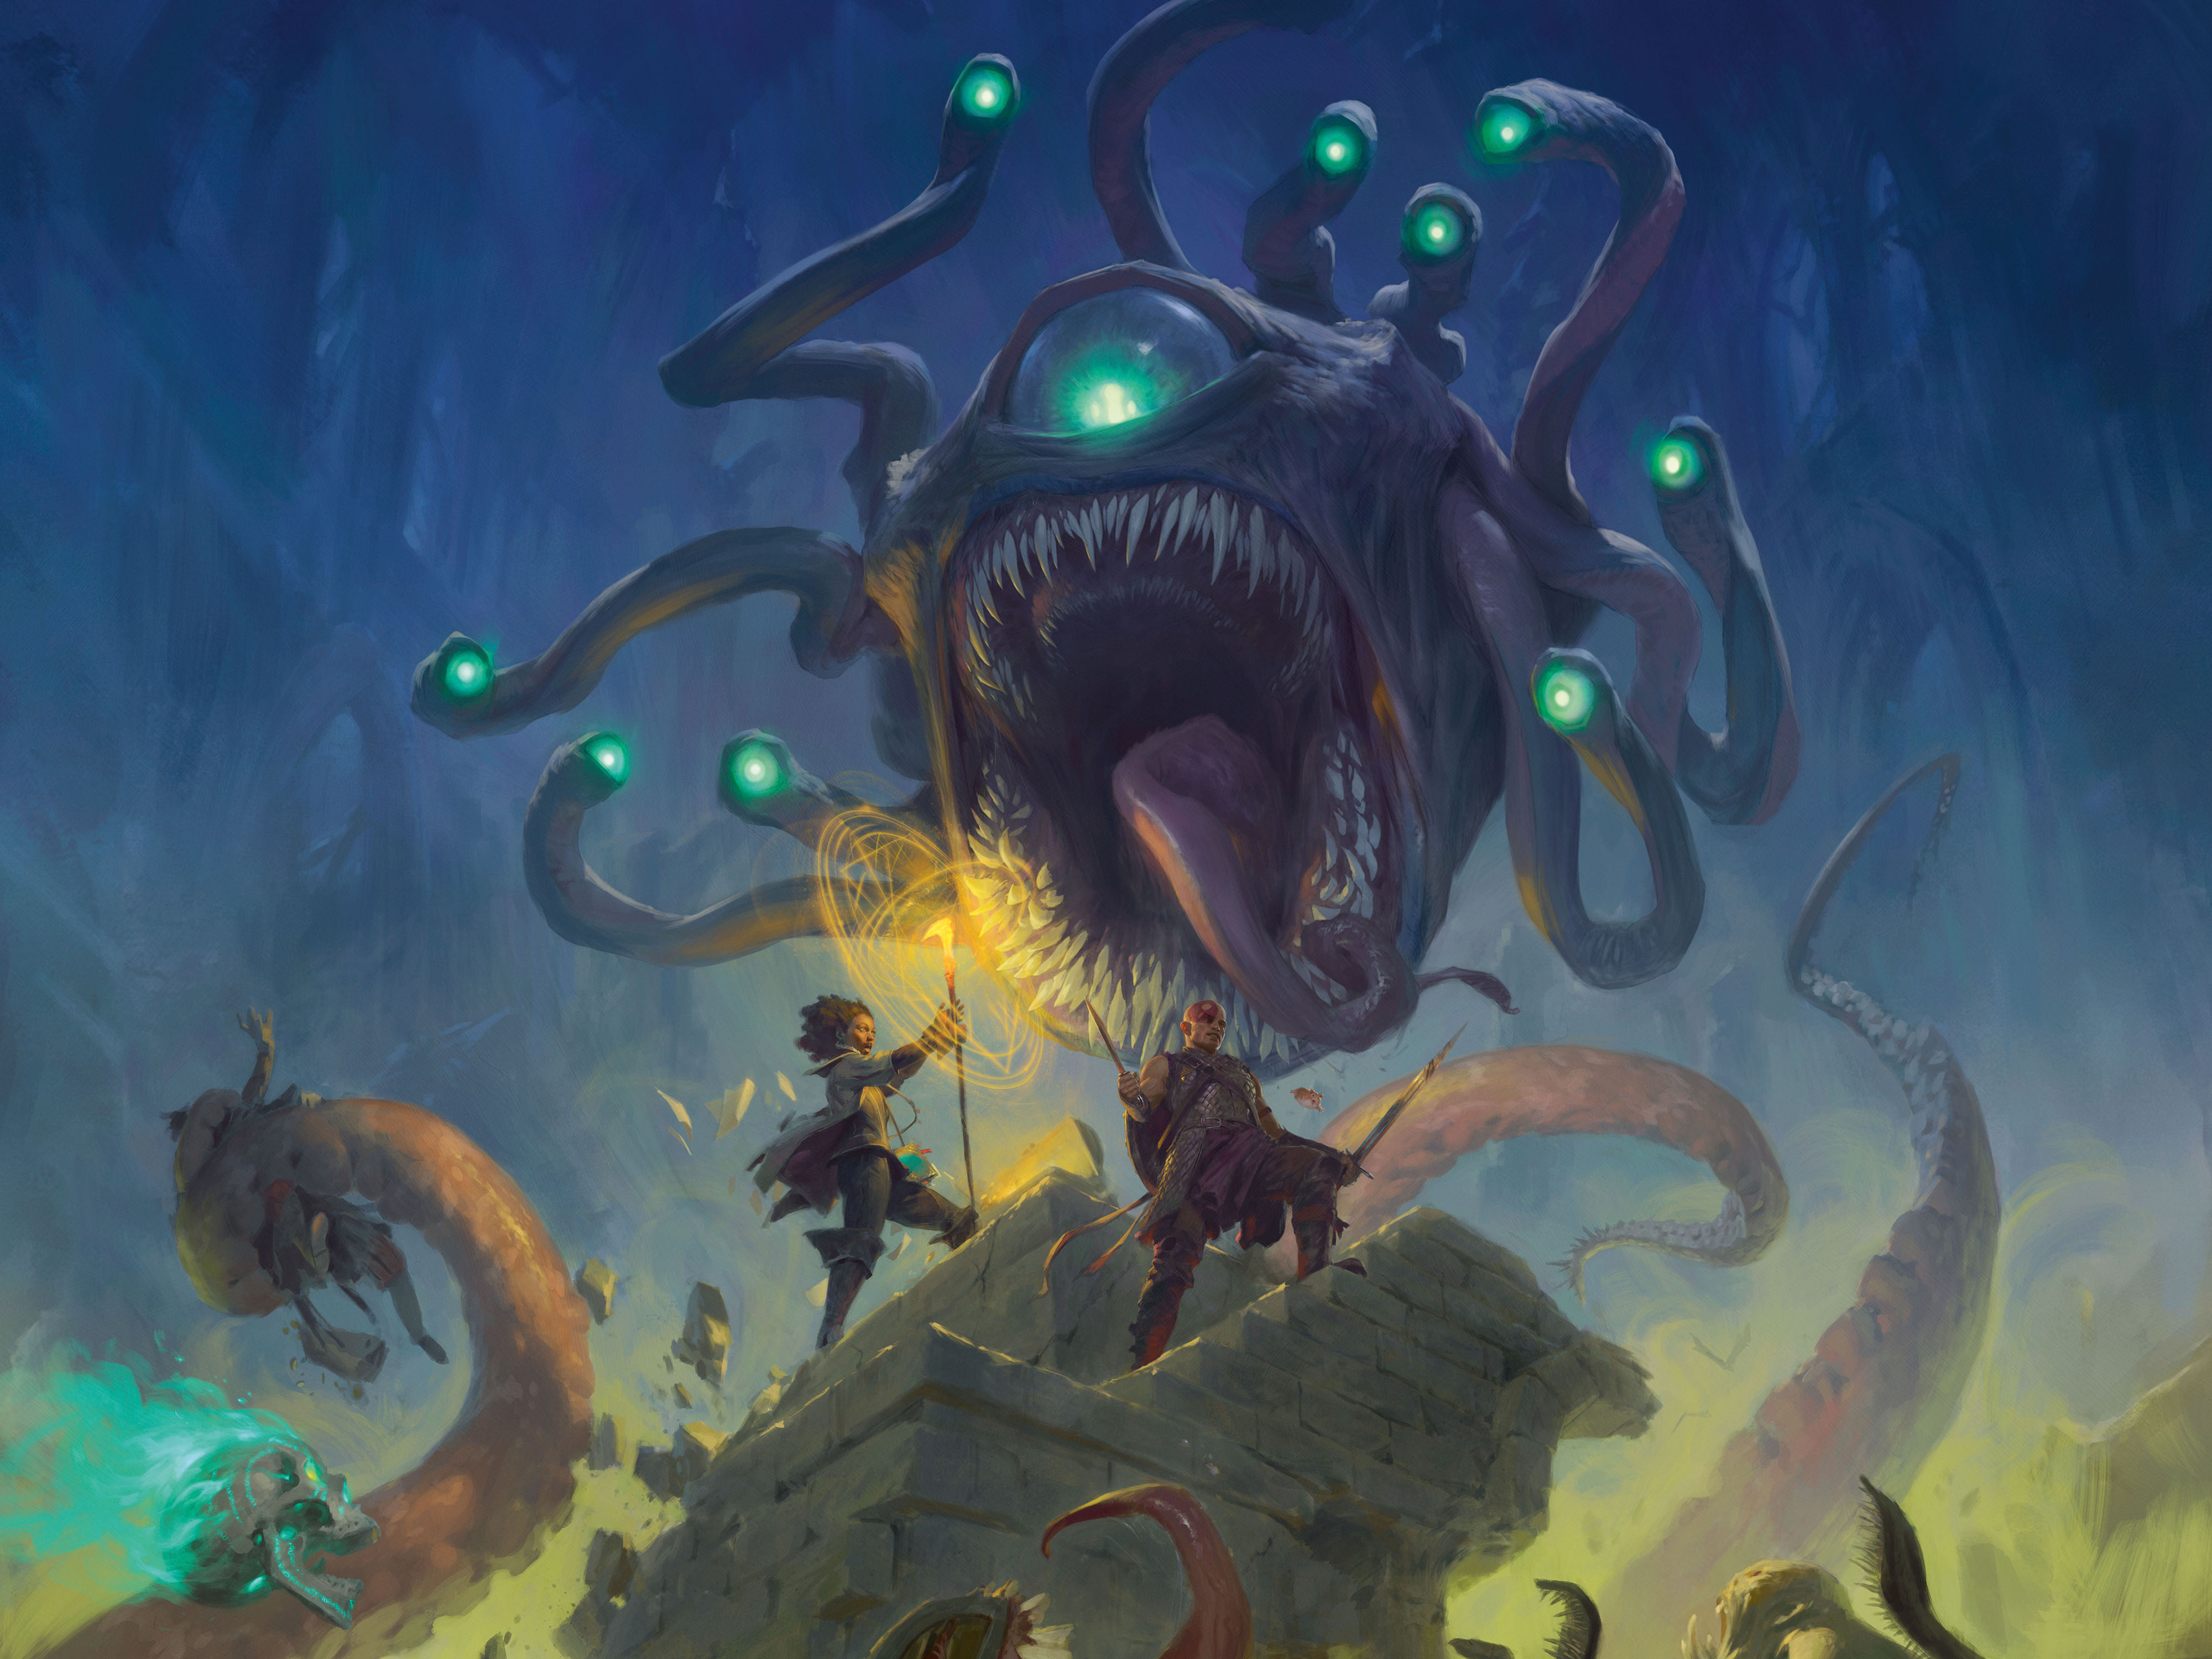 A close-up of Tyler Jacobson’s cover of the Monster Manual (2025) features a massive green-eyed beholder about to let loose on Minsc and Boo.